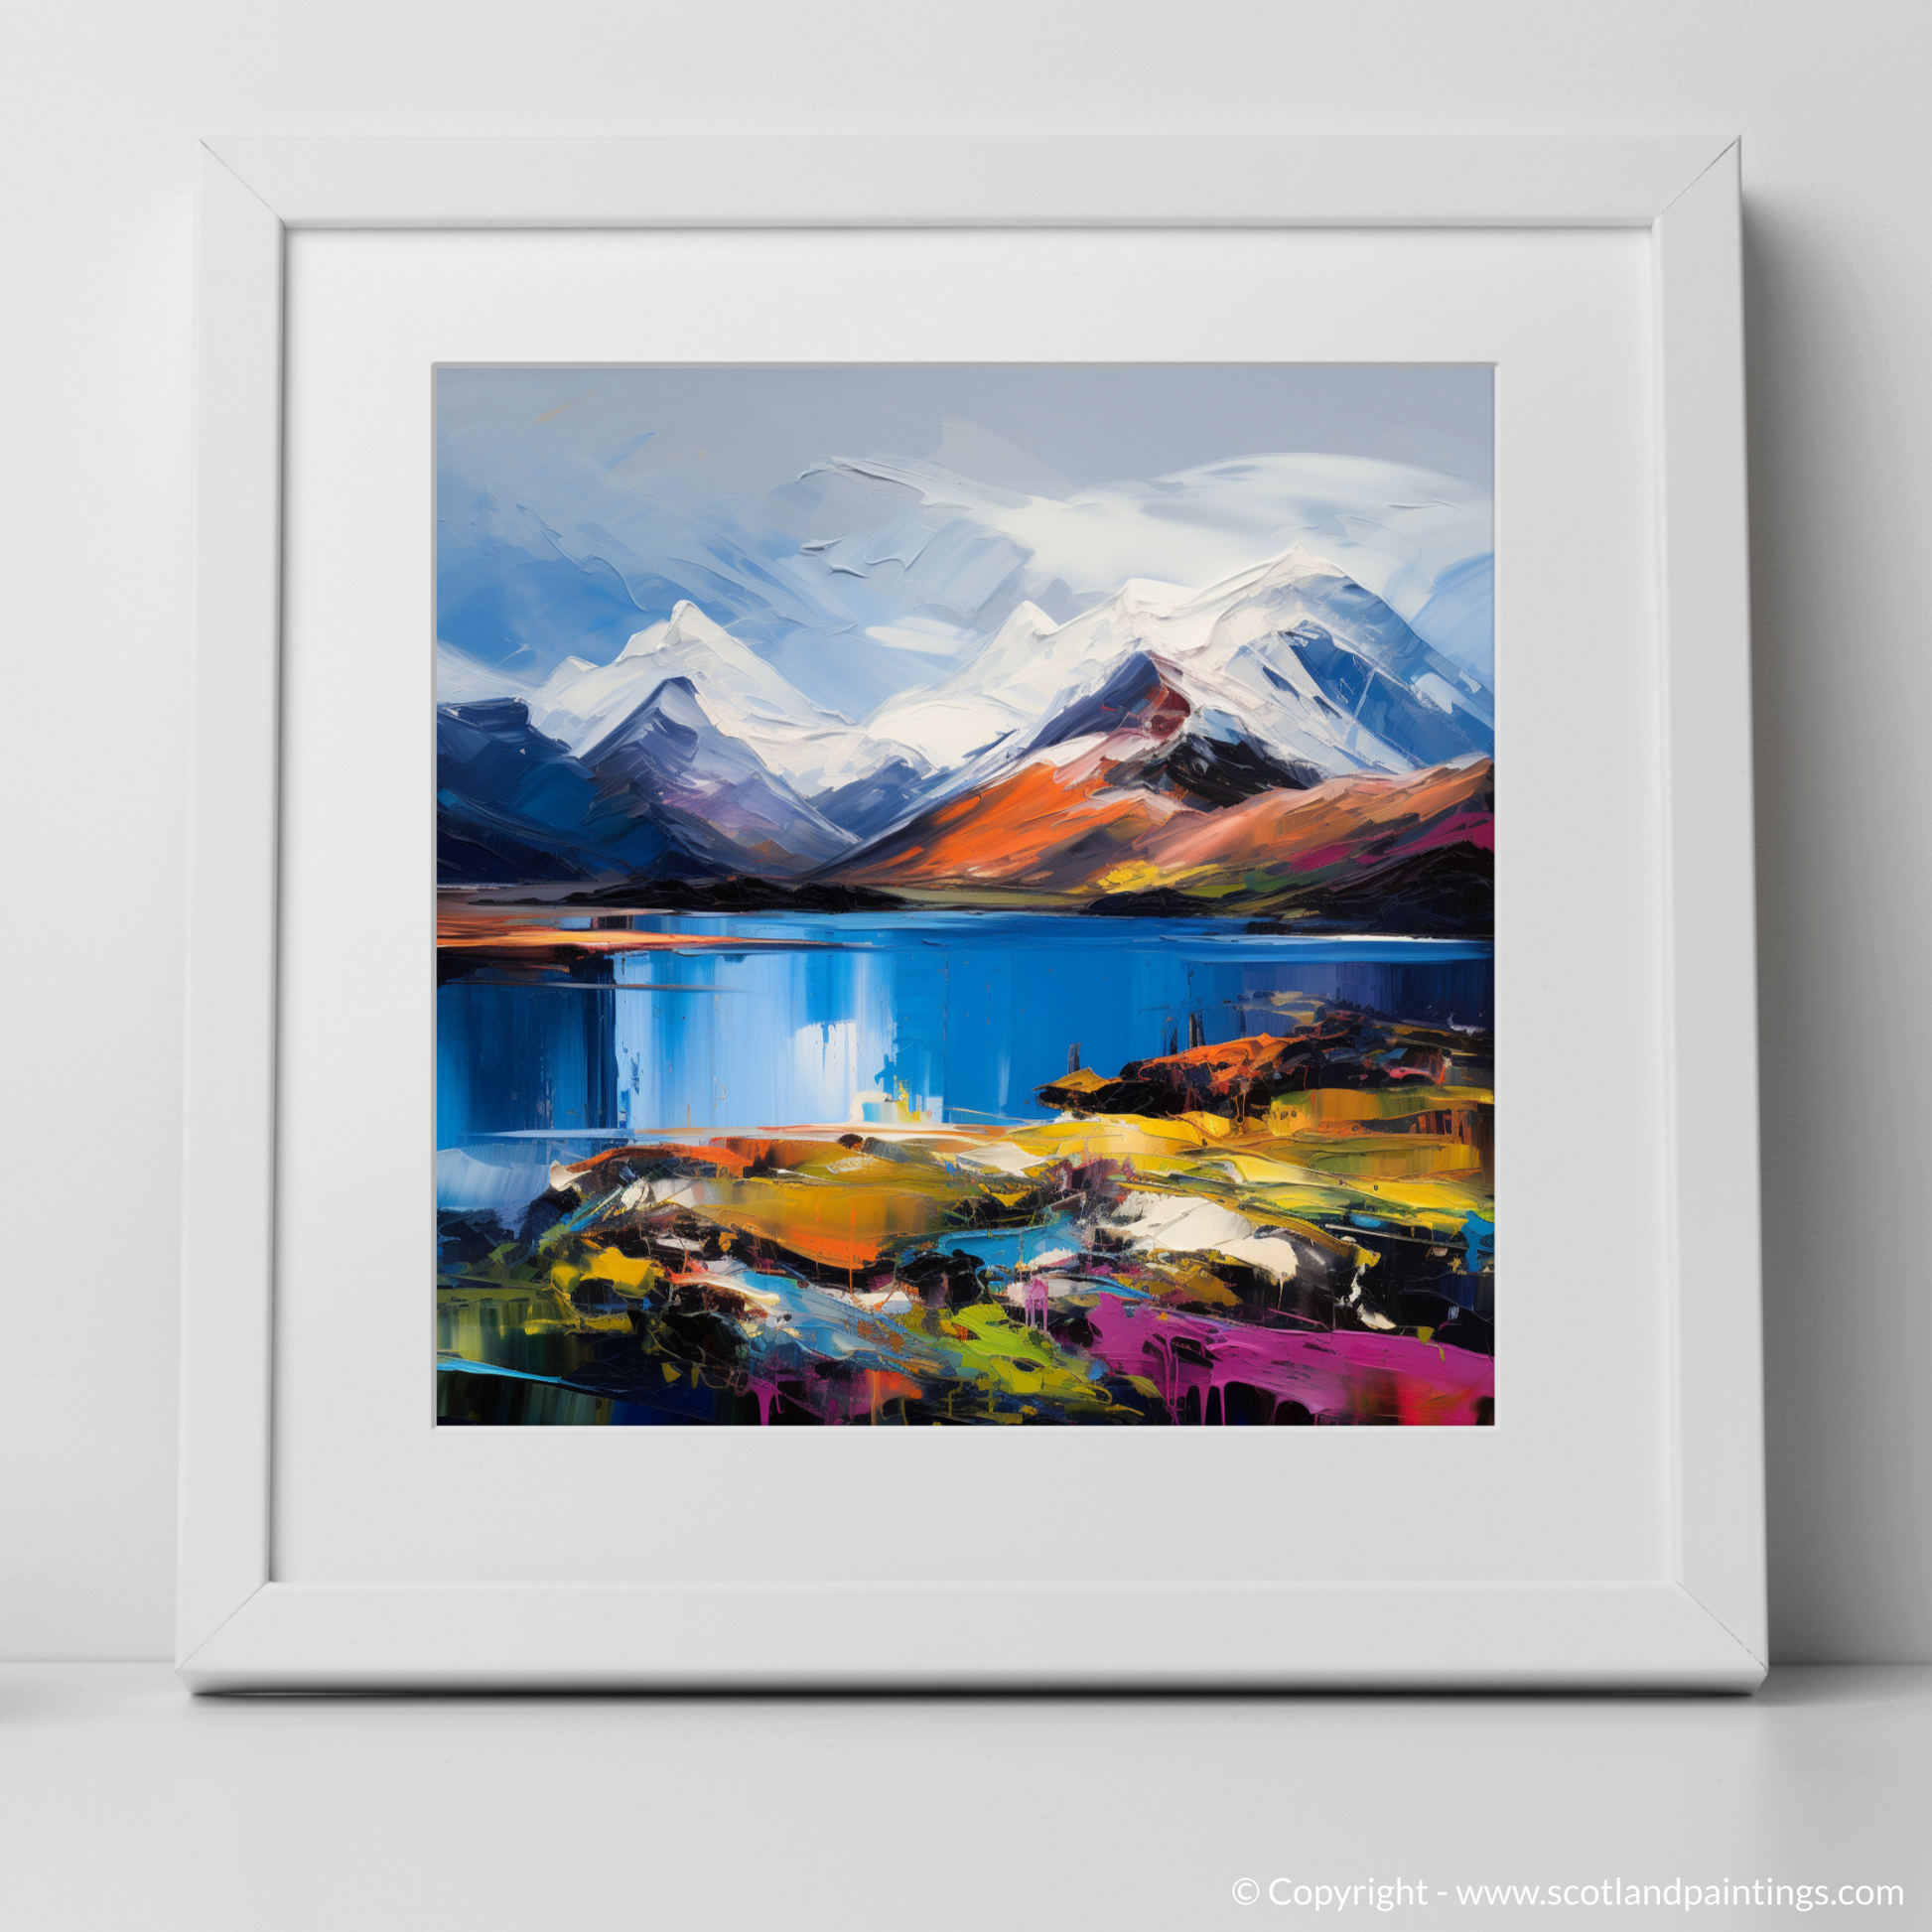 Art Print of Snow-capped peaks overlooking Loch Lomond with a white frame